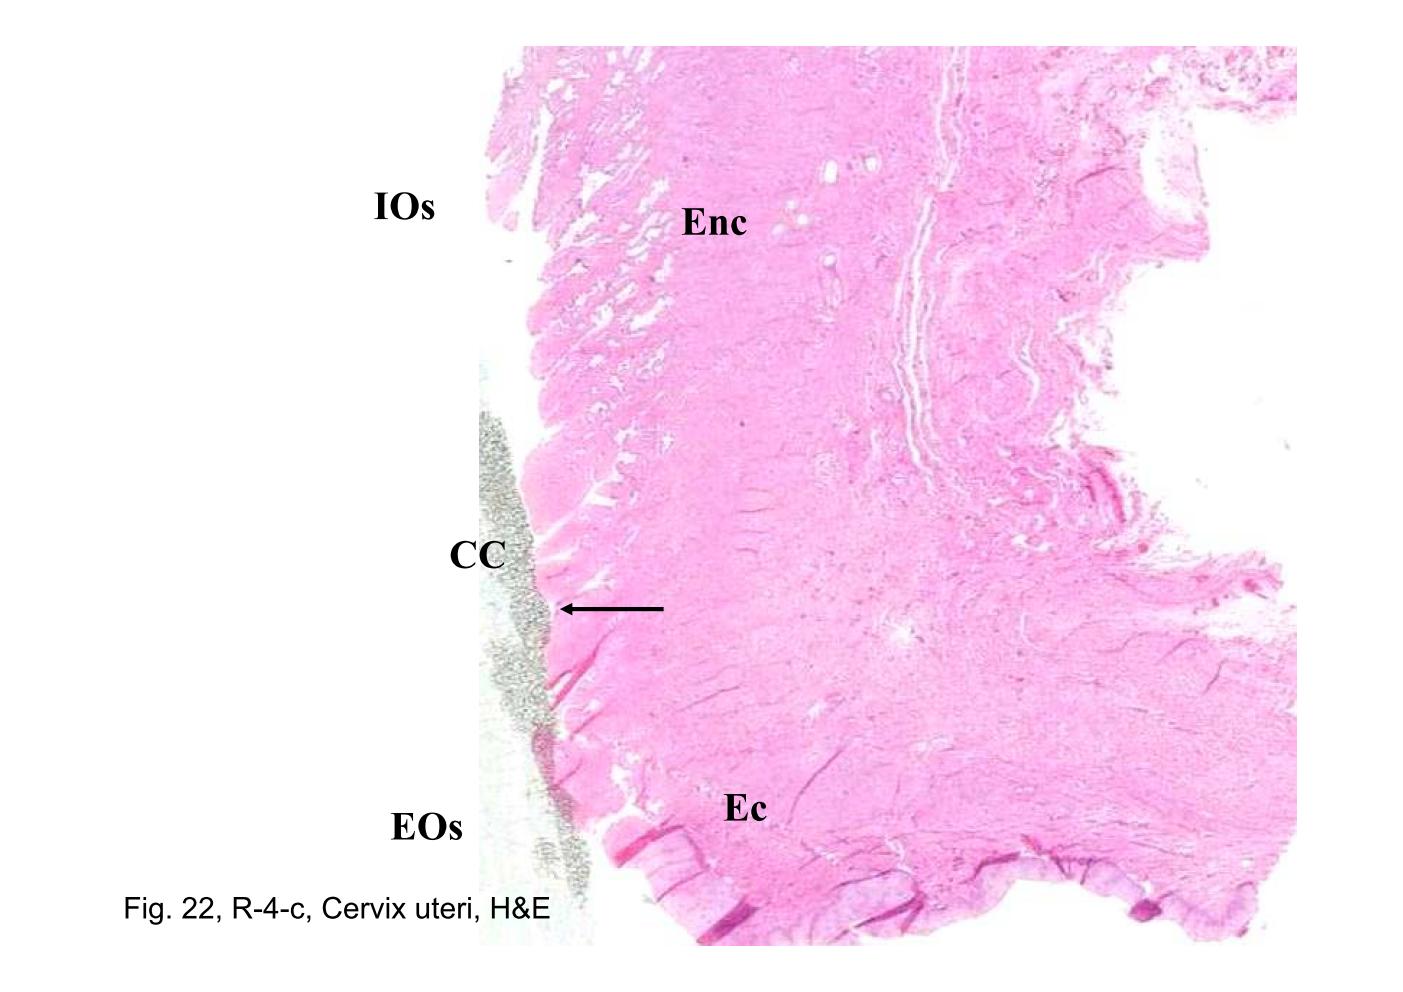 block14_43.jpg - Fig. 22, R-4-c, Cervix uteri, H&EThe portion of the cervix that projects into the vagina, the ectocervix  (Ec), is covered with a stratified squamous epithelium. An abrupt  transition (arrow) from this squamous epithelium to columnar  epithelium, the endocervix (Enc), occurs at the entry to the cervical  canal (CC). The upper end, the internal os (IOs), communicates  with the uterine cavity, and the lower end, the external os (EOs),  communicates with the vagina.